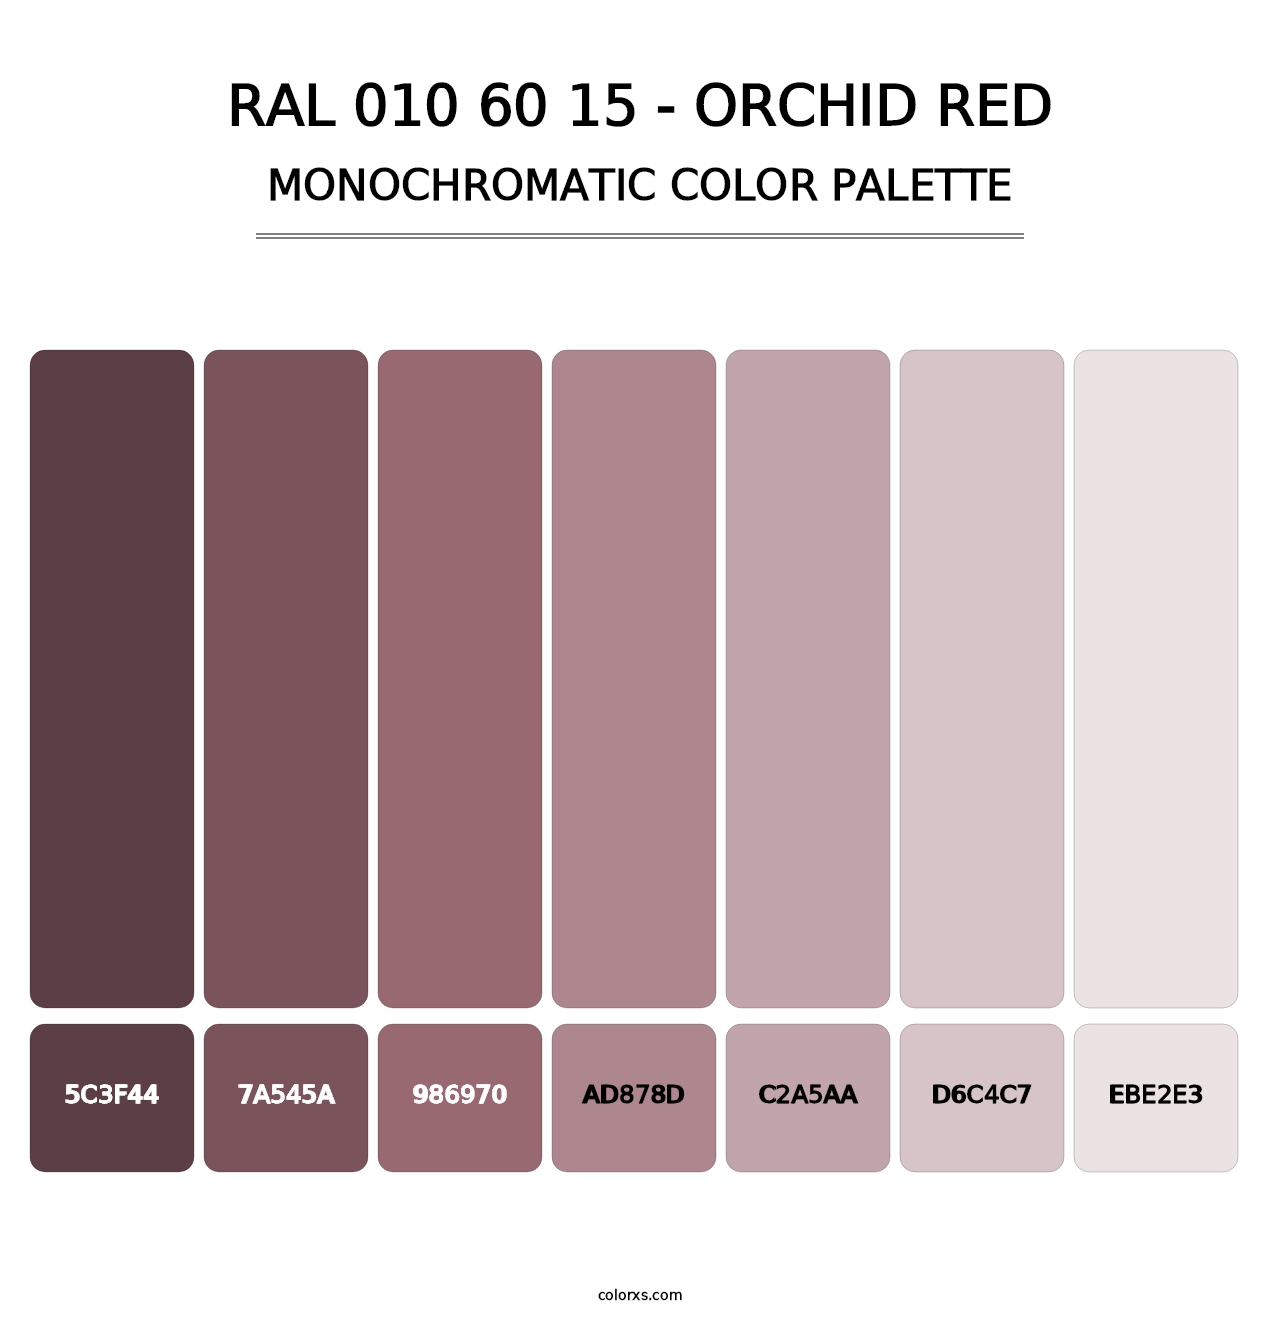 RAL 010 60 15 - Orchid Red - Monochromatic Color Palette